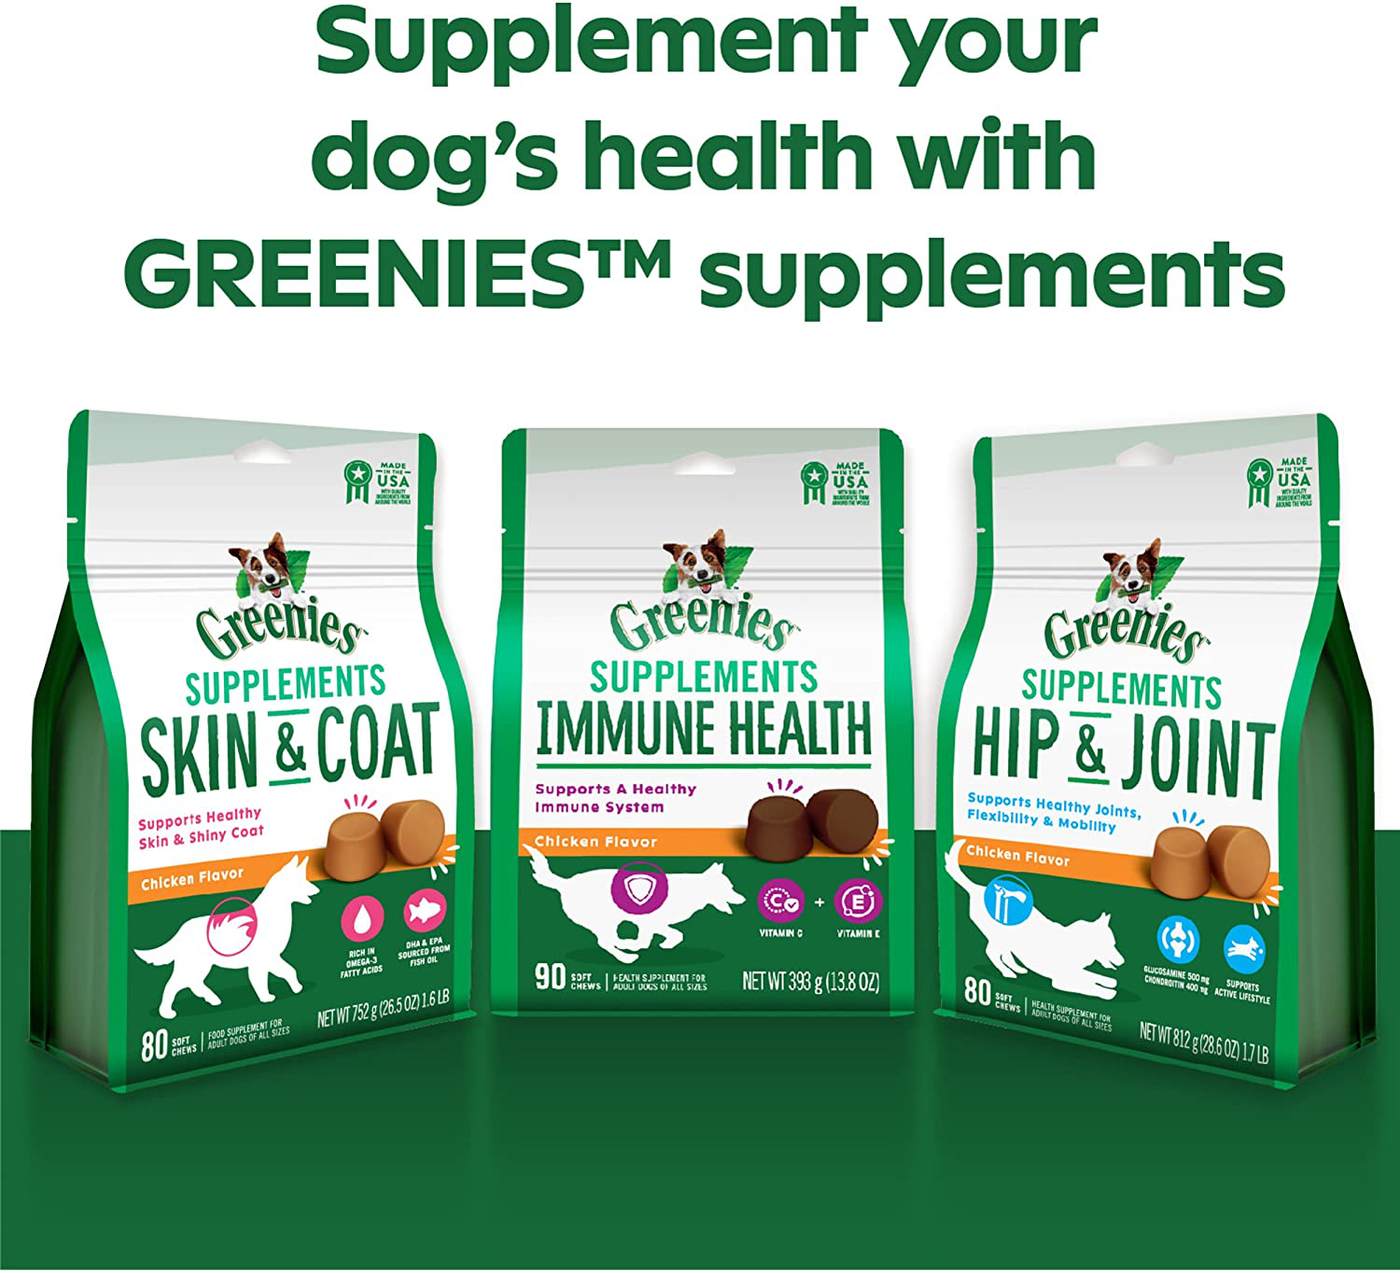 GREENIES Immune Health Dog Supplements with an Antioxidant Blend of Vitamin C and E, 90-Count Chicken-Flavor Soft Chews for Adult Dogs